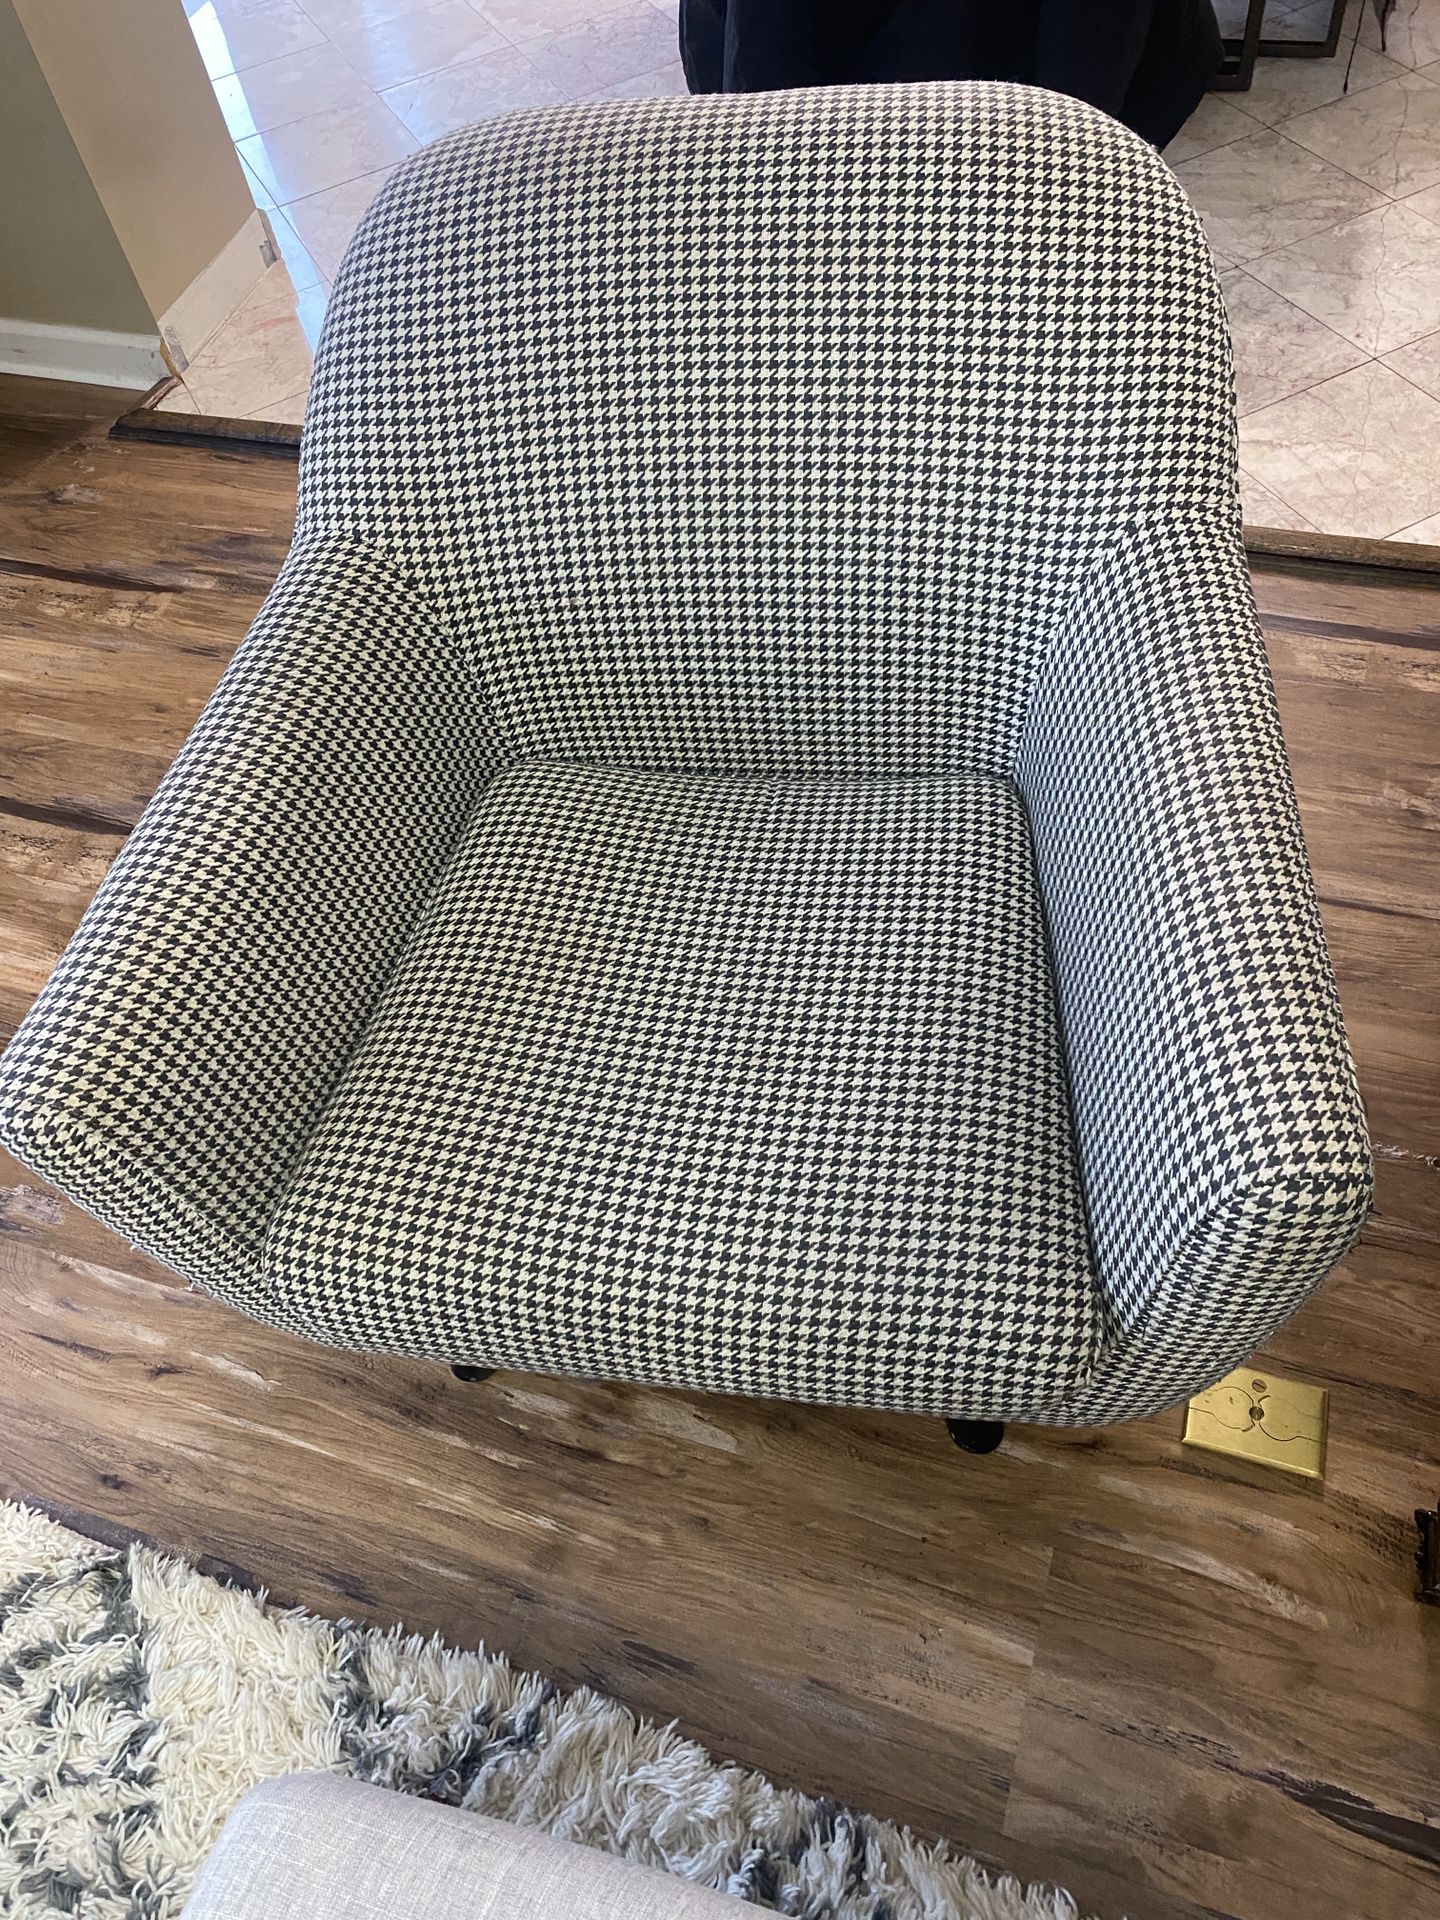 Article chair 